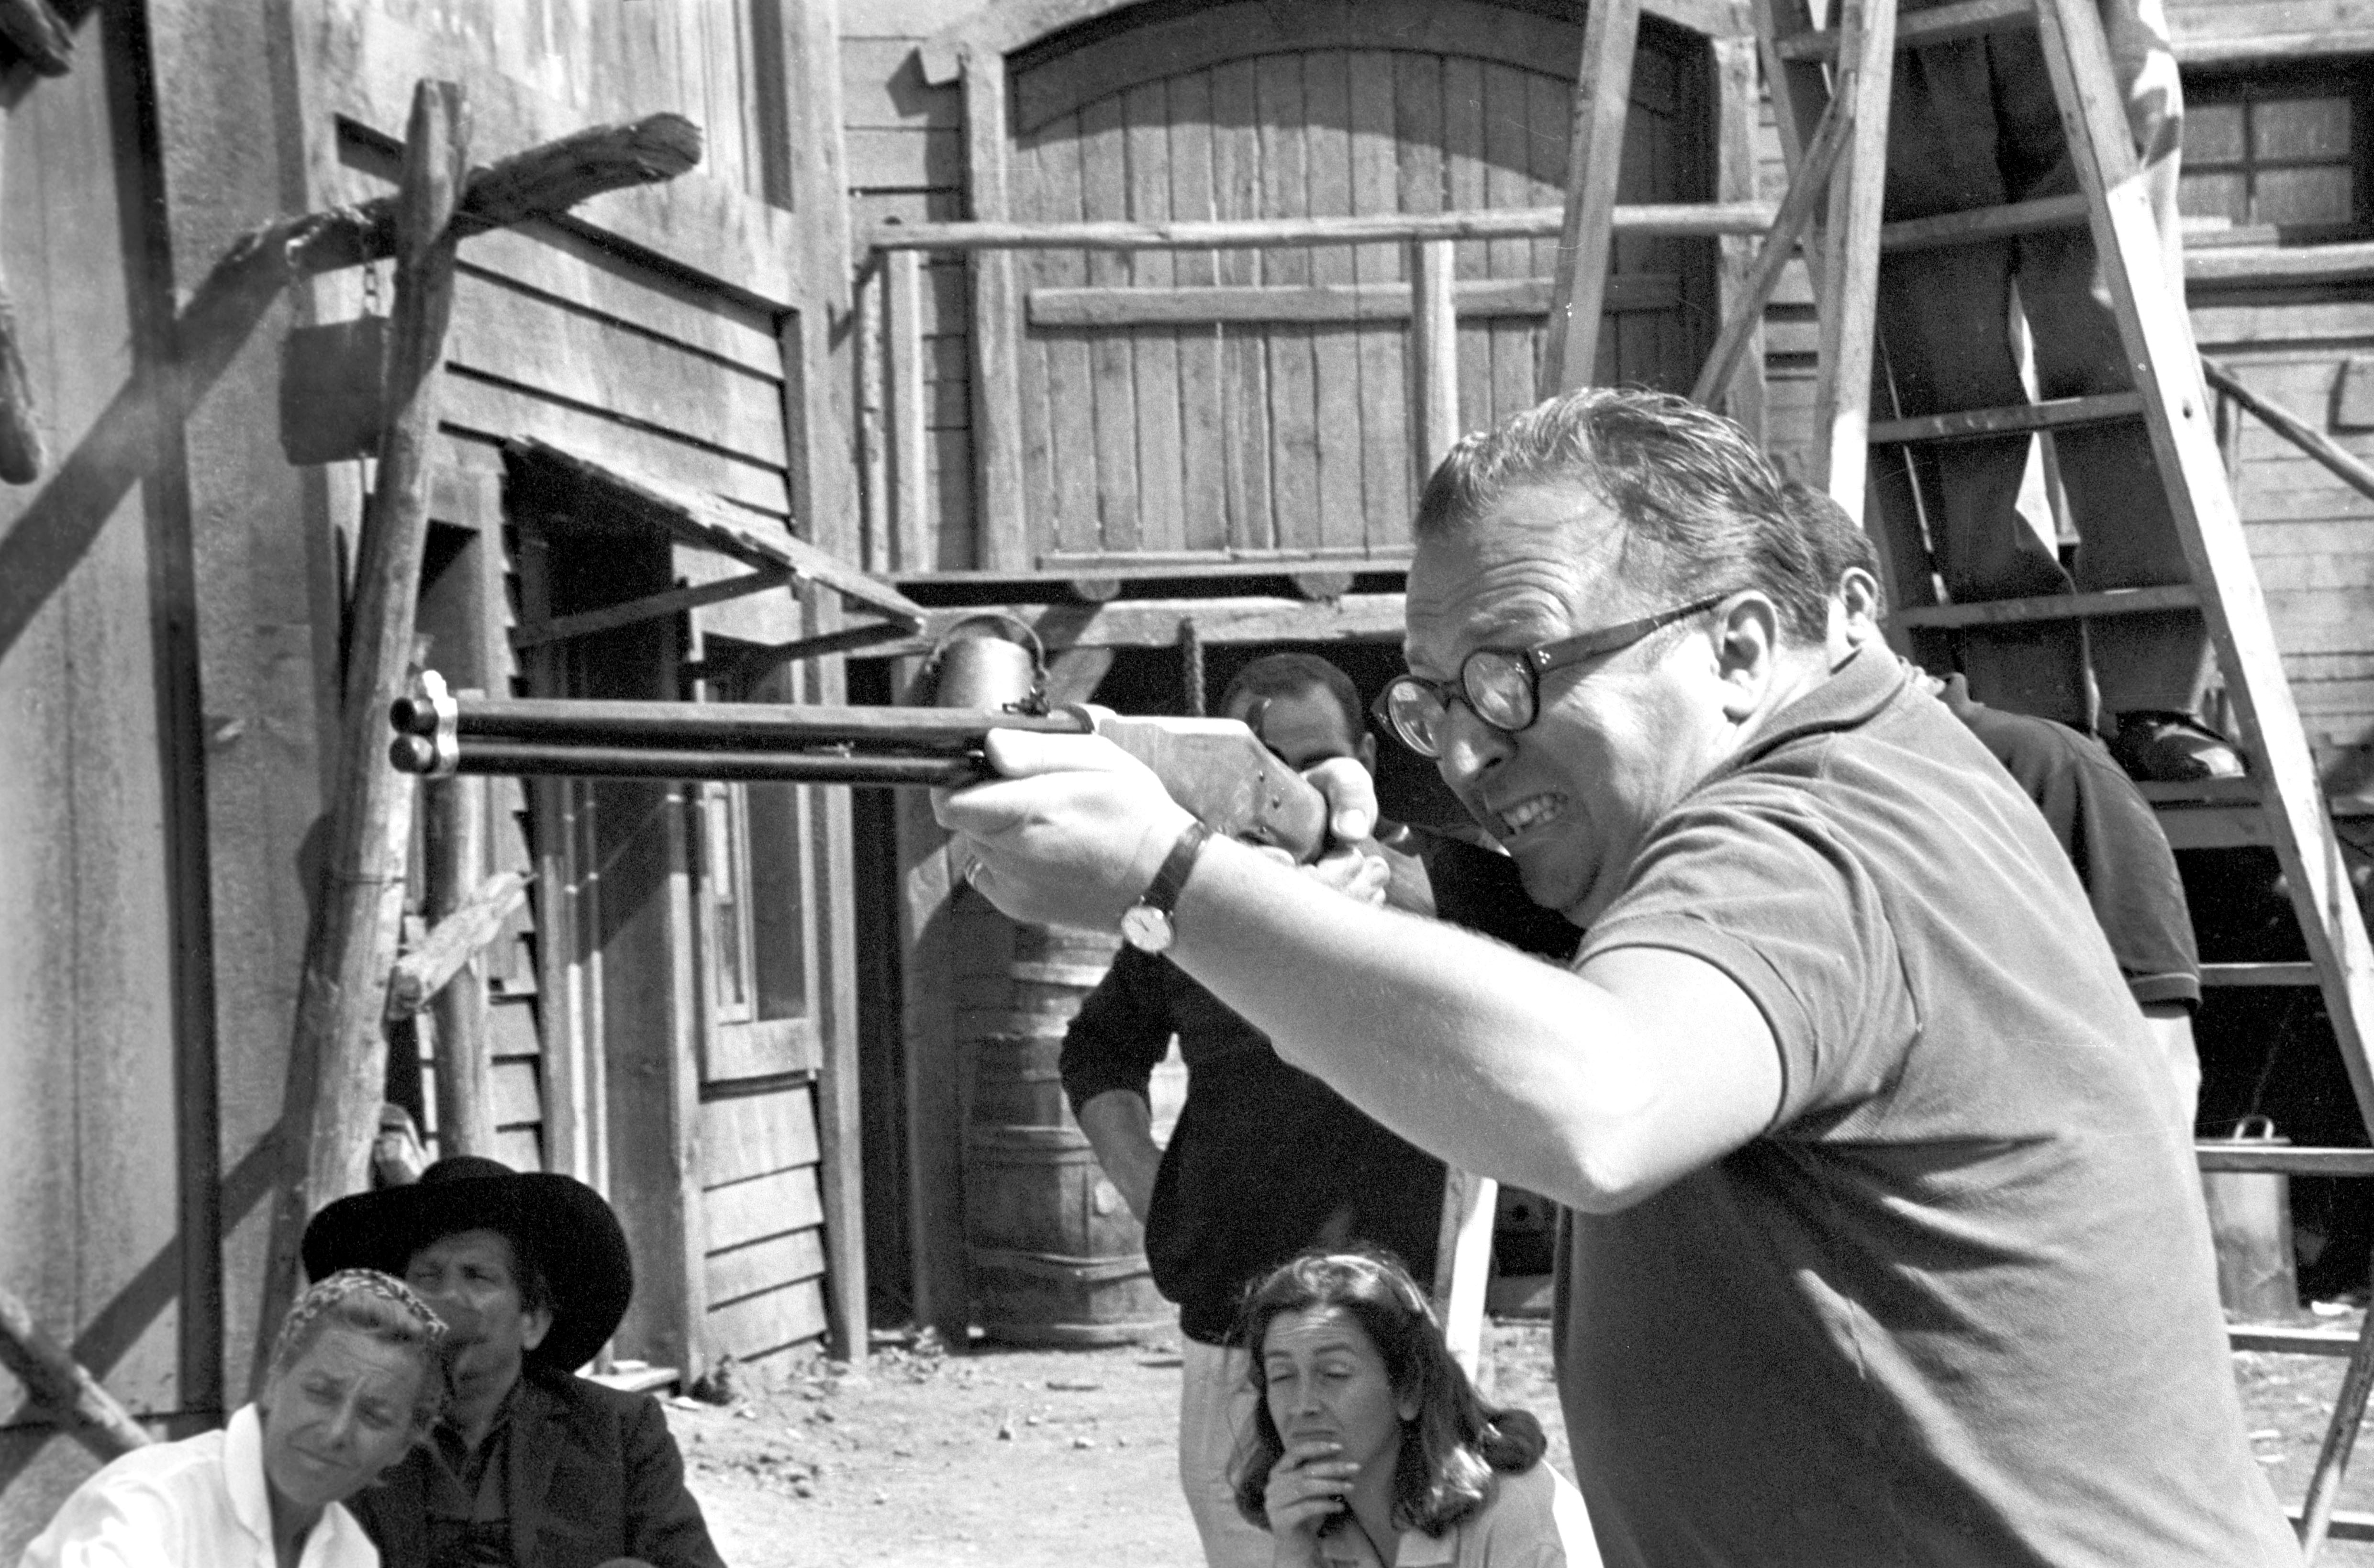 The director Sergio Leone shooting with a rifle on the set of the film The Good, the Bad and the Ugly. 1966 (Photo by Reporters Associati & Archivi/Mondadori Portfolio via Getty Images)